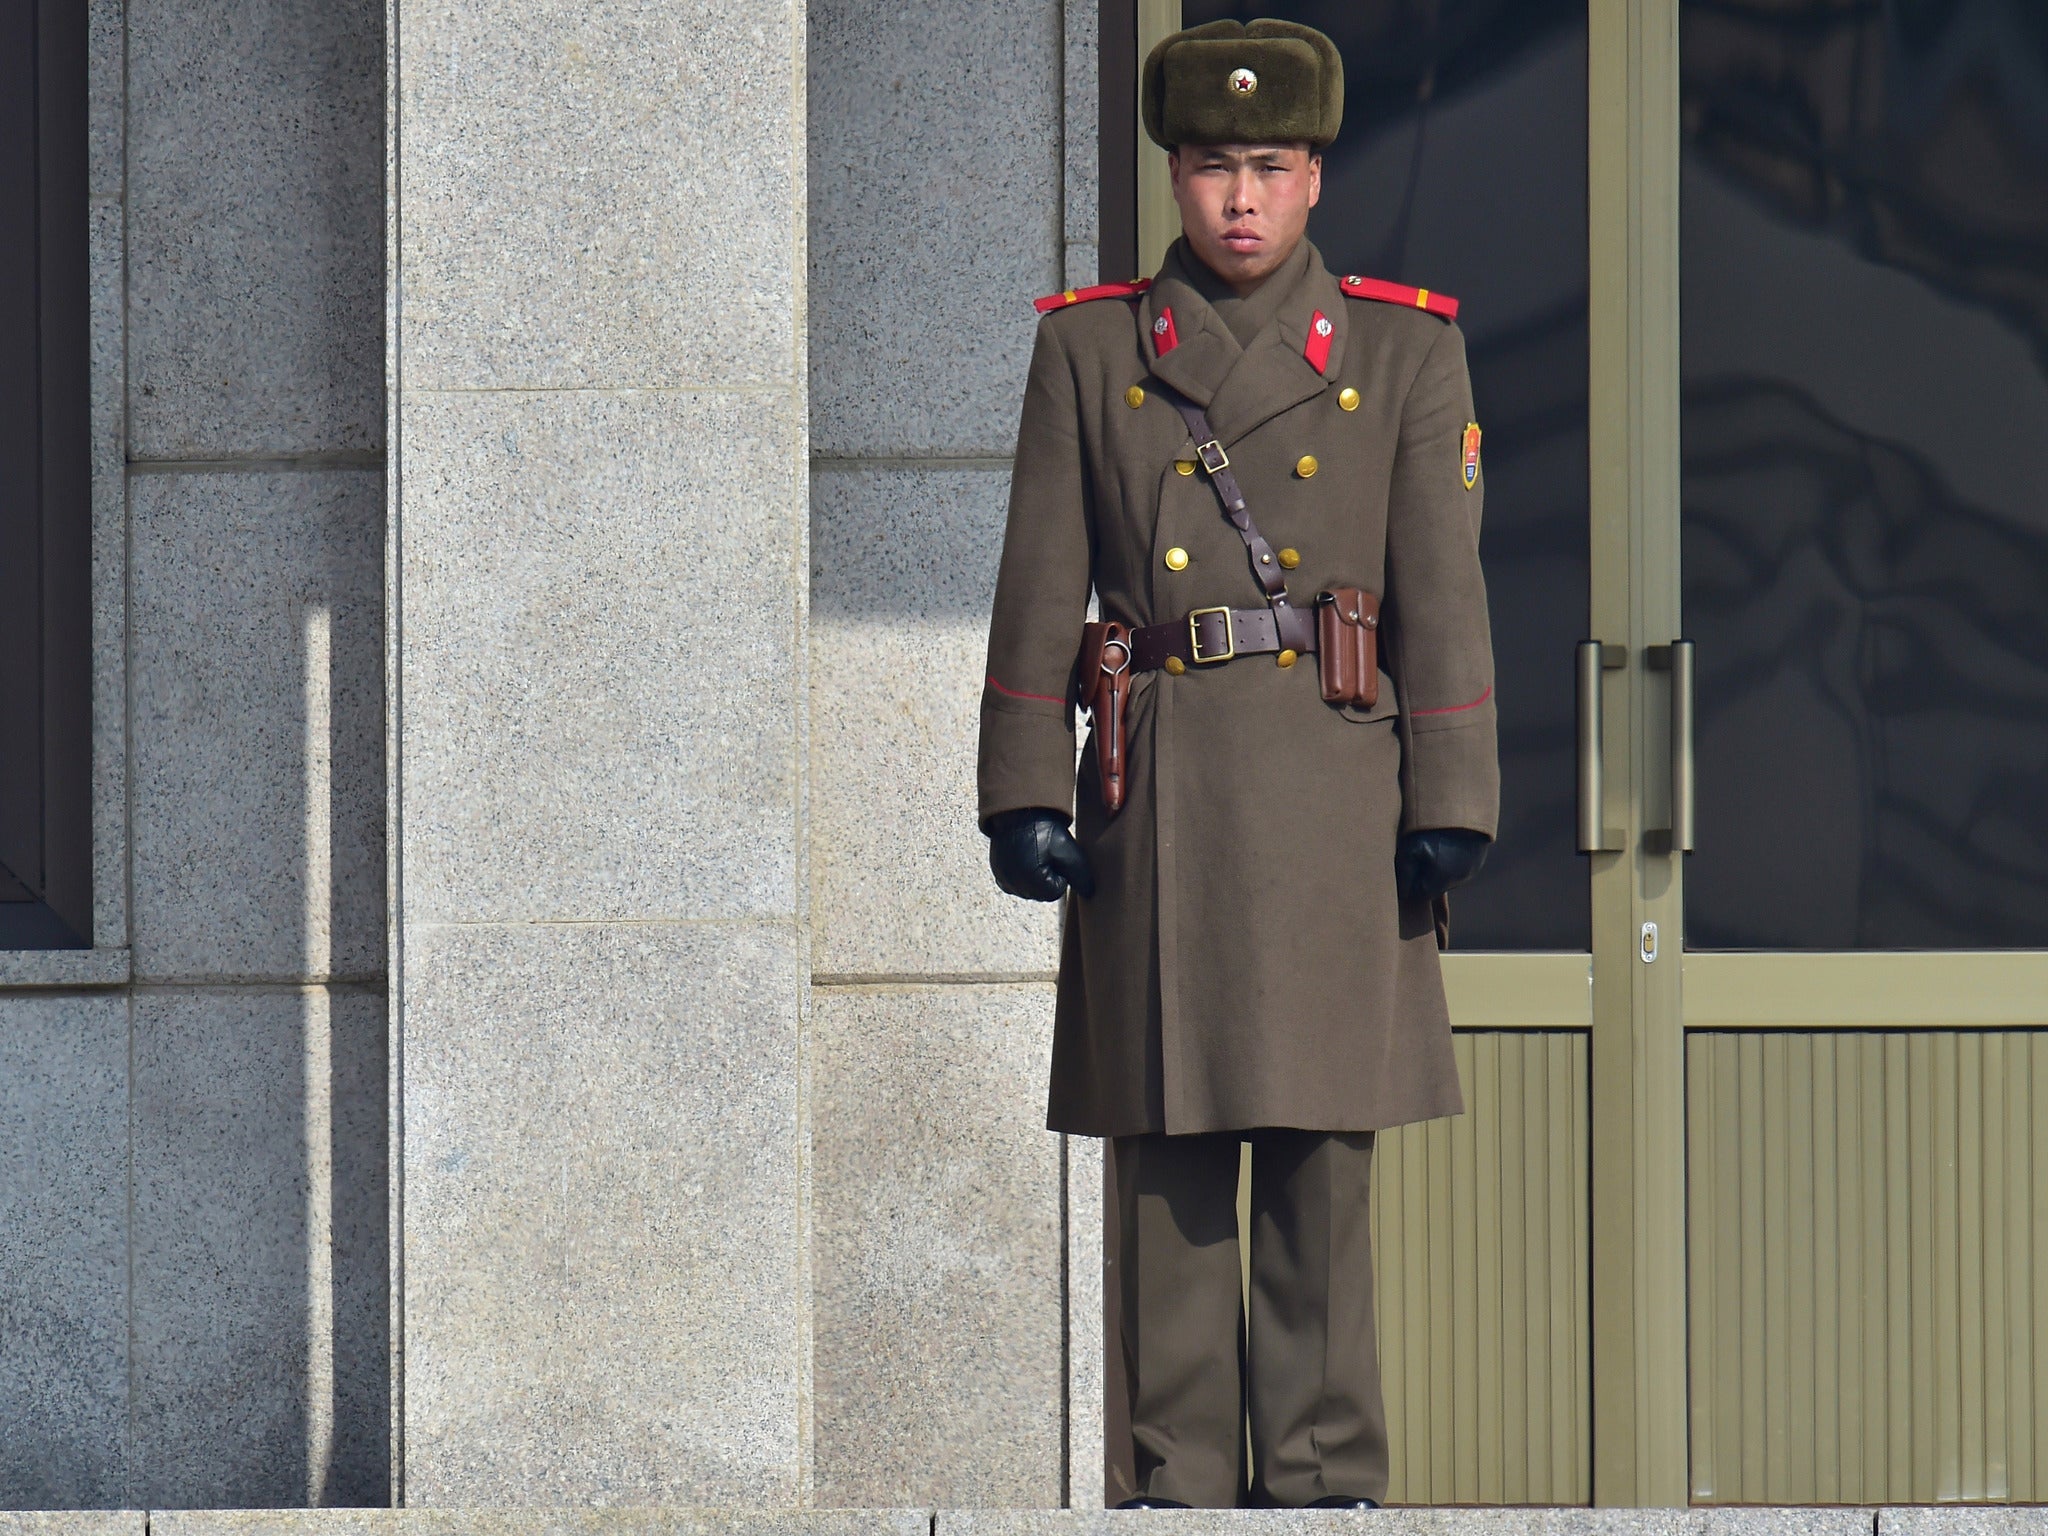 The North Korean regime is thought to use public executions to keep its population in line